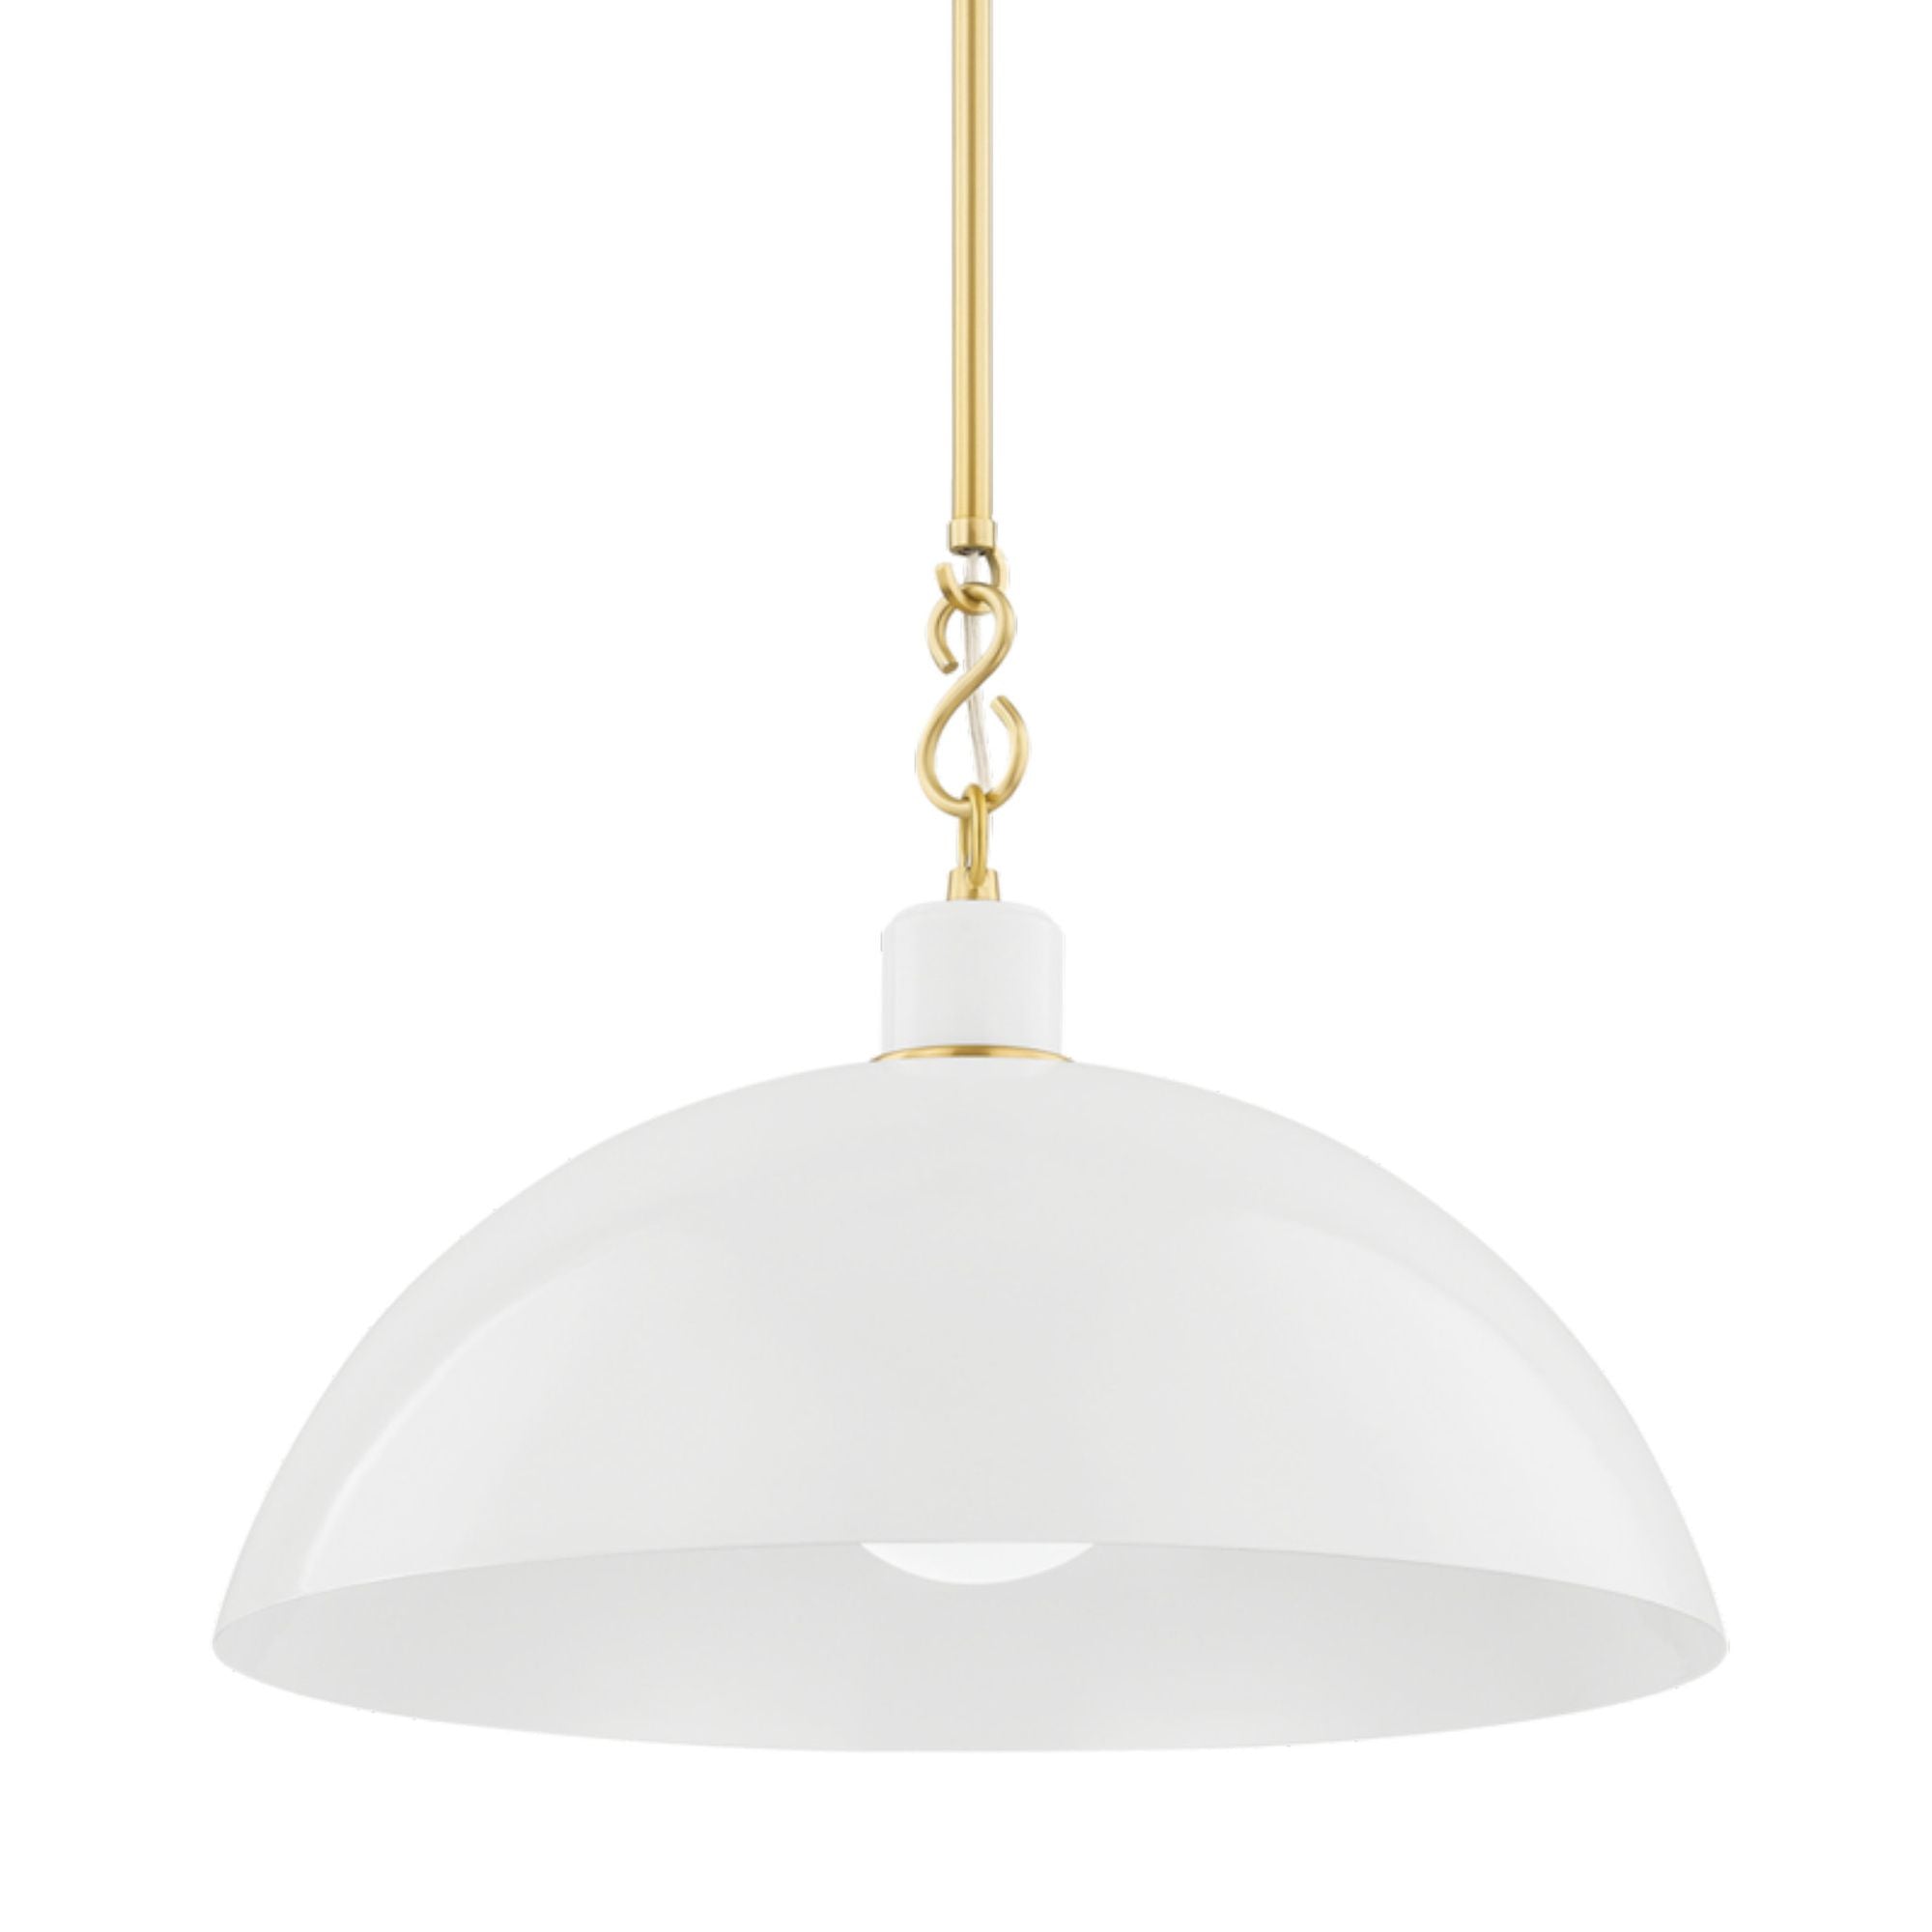 Camille 1-Light Pendant in Aged Brass by Zio & Sons